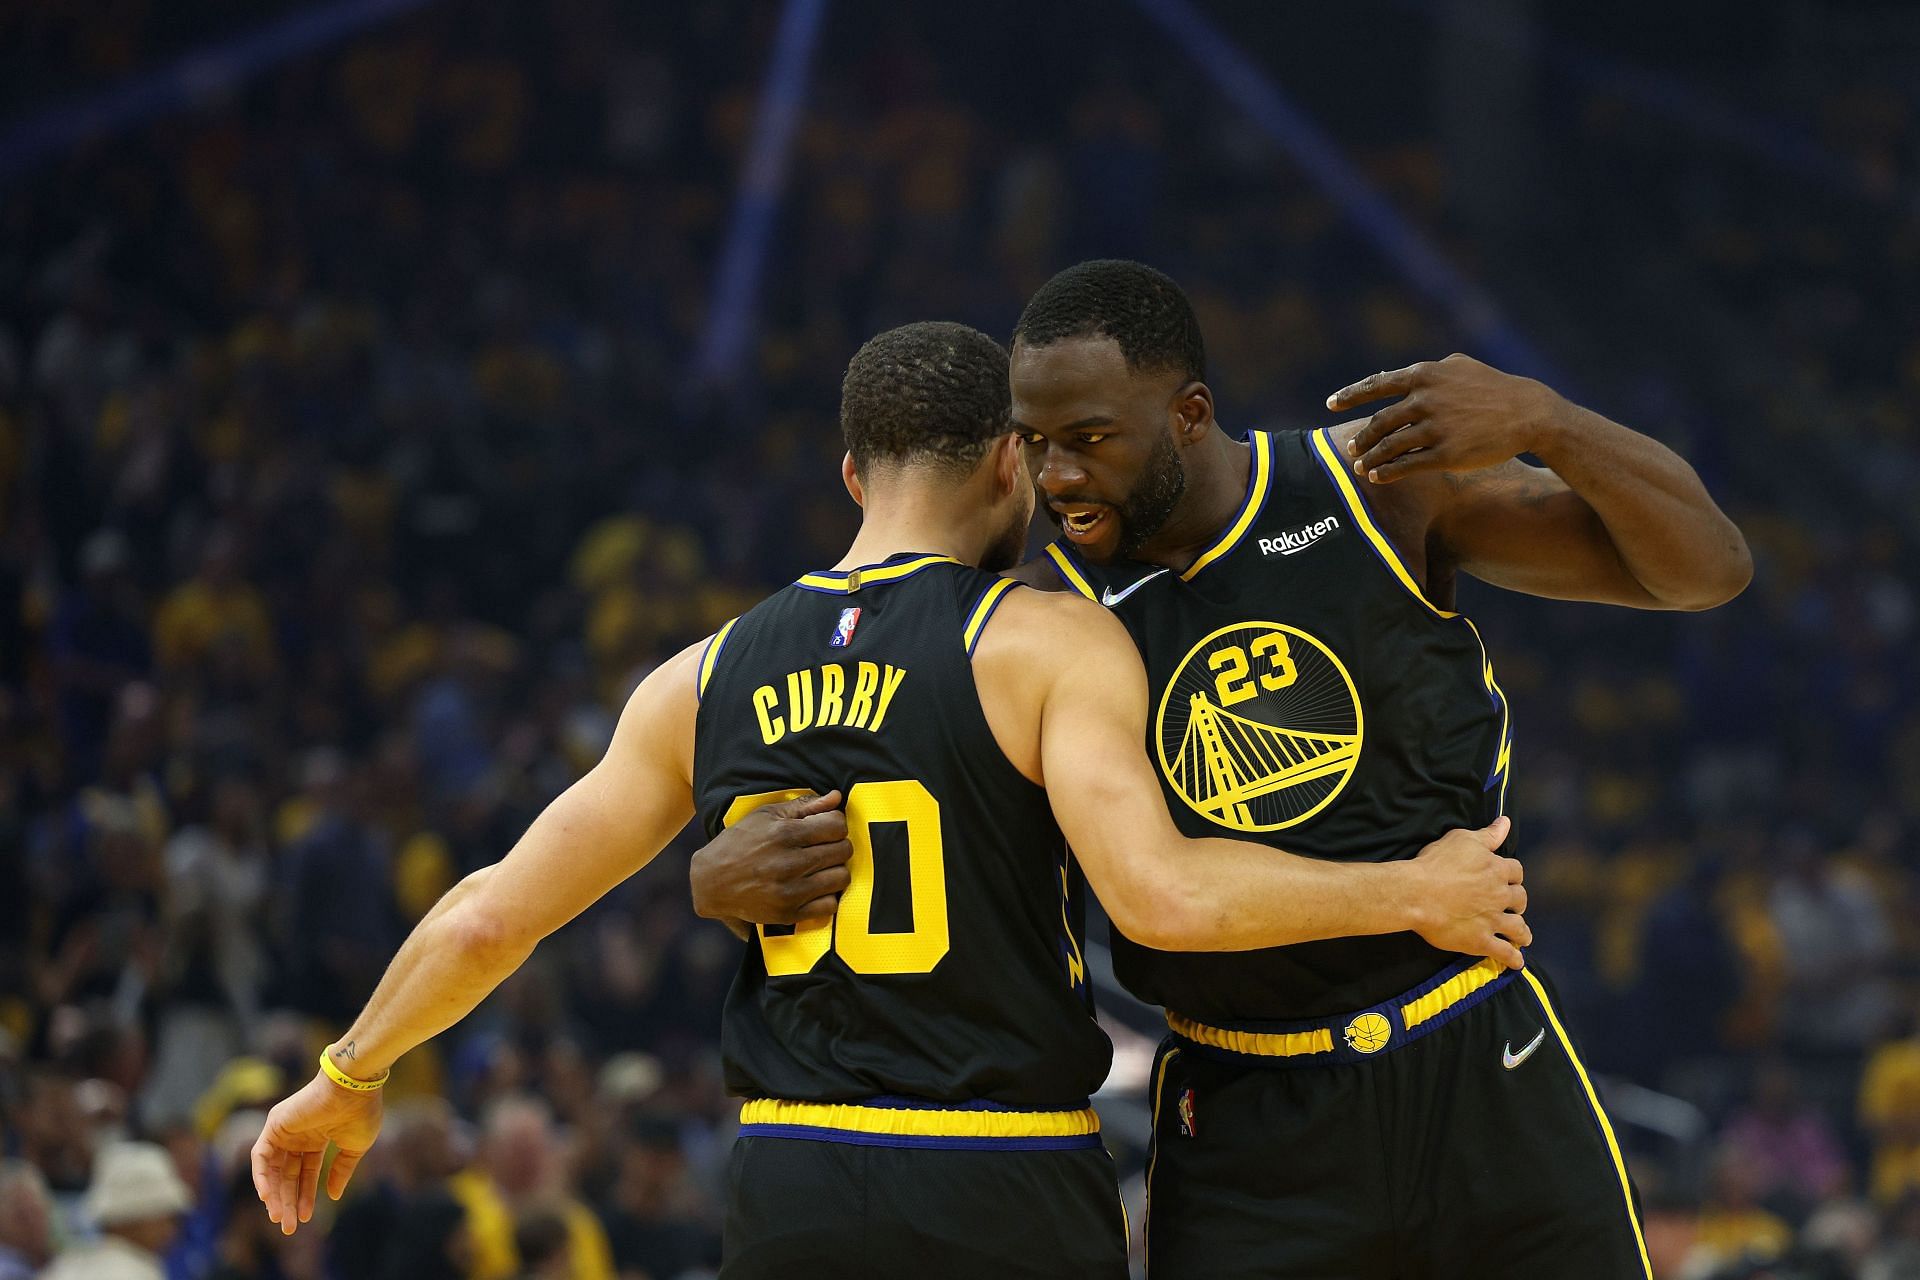 Steph Curry celebrates a play with Draymond Green